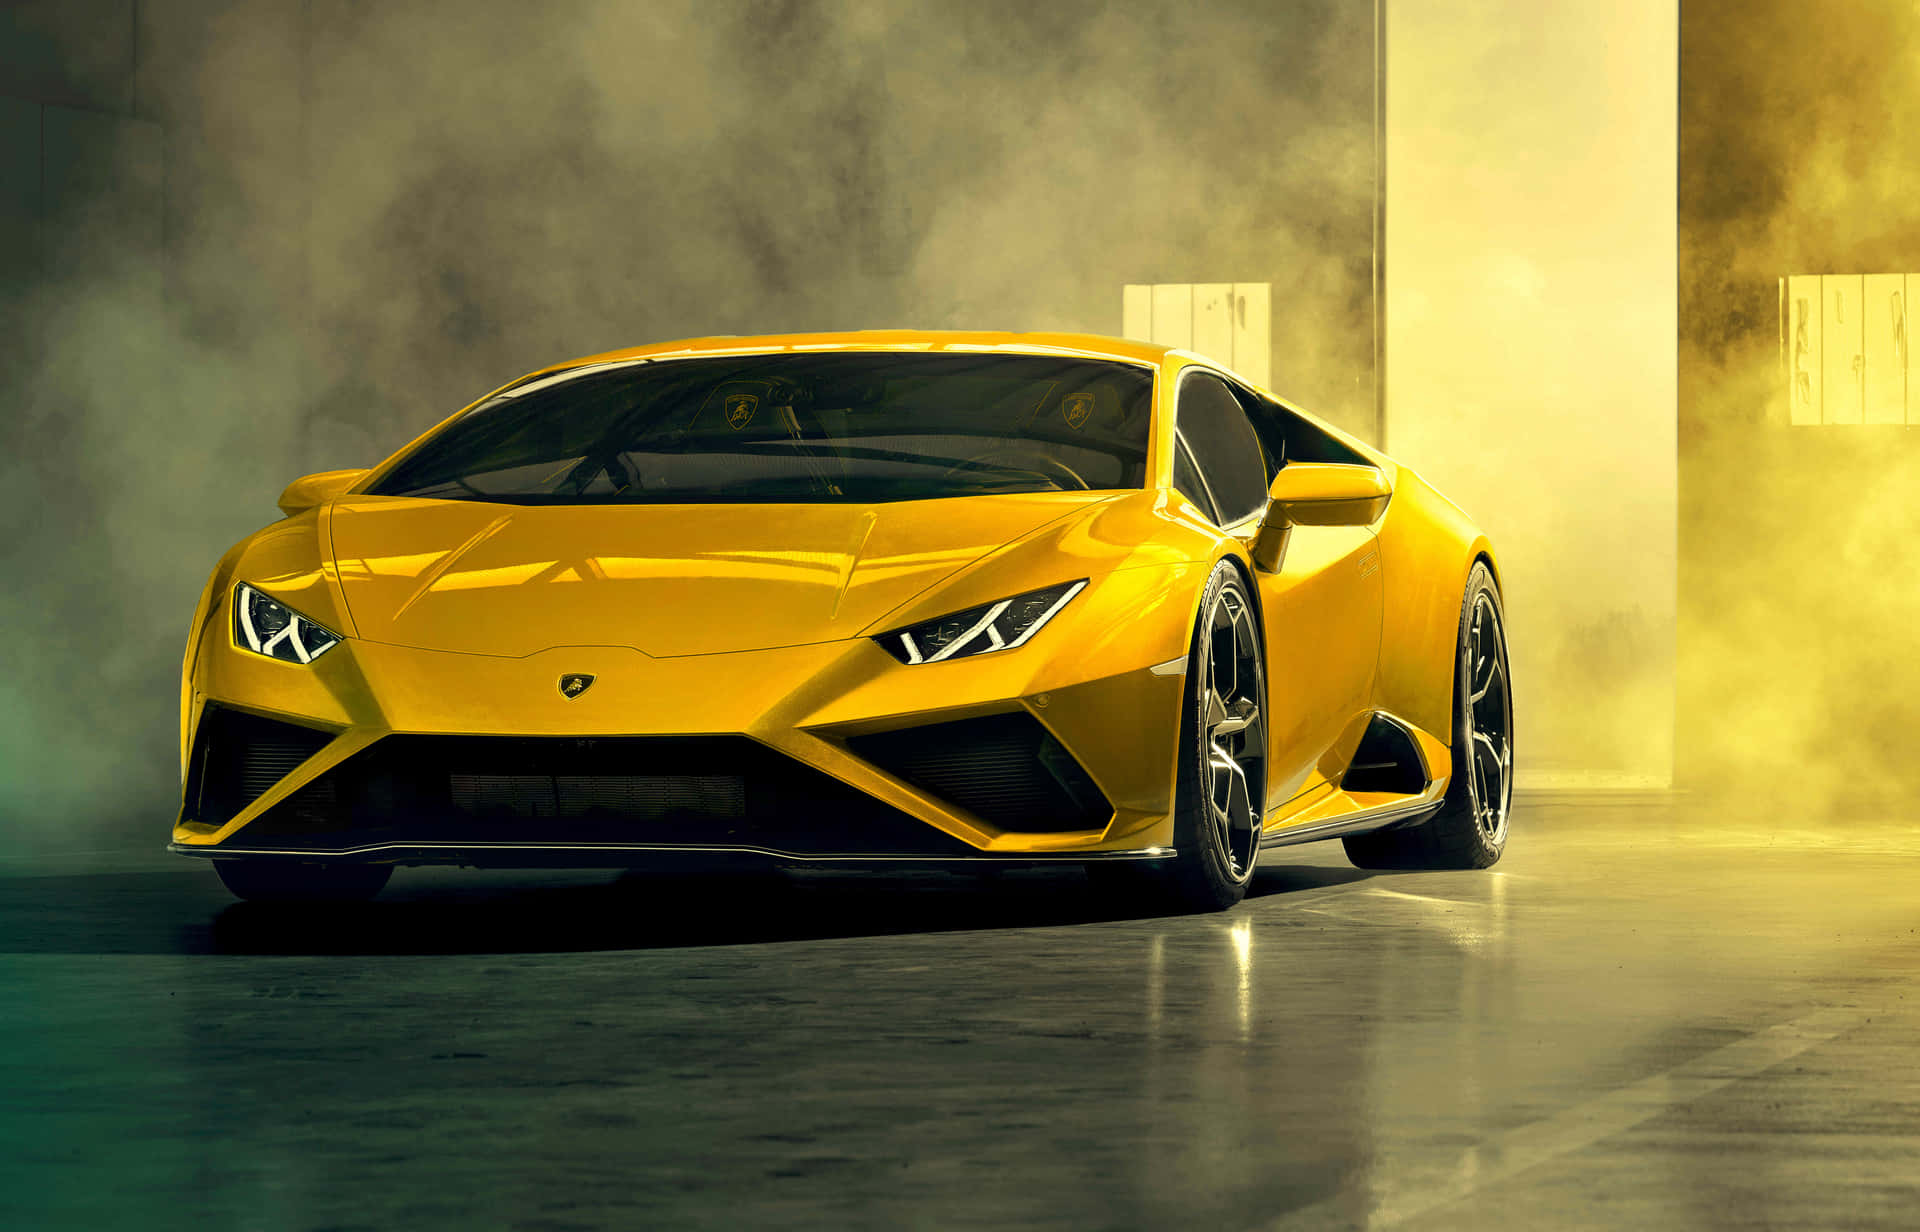 A Yellow Sports Car Is Driving Through A Smoke Filled Room